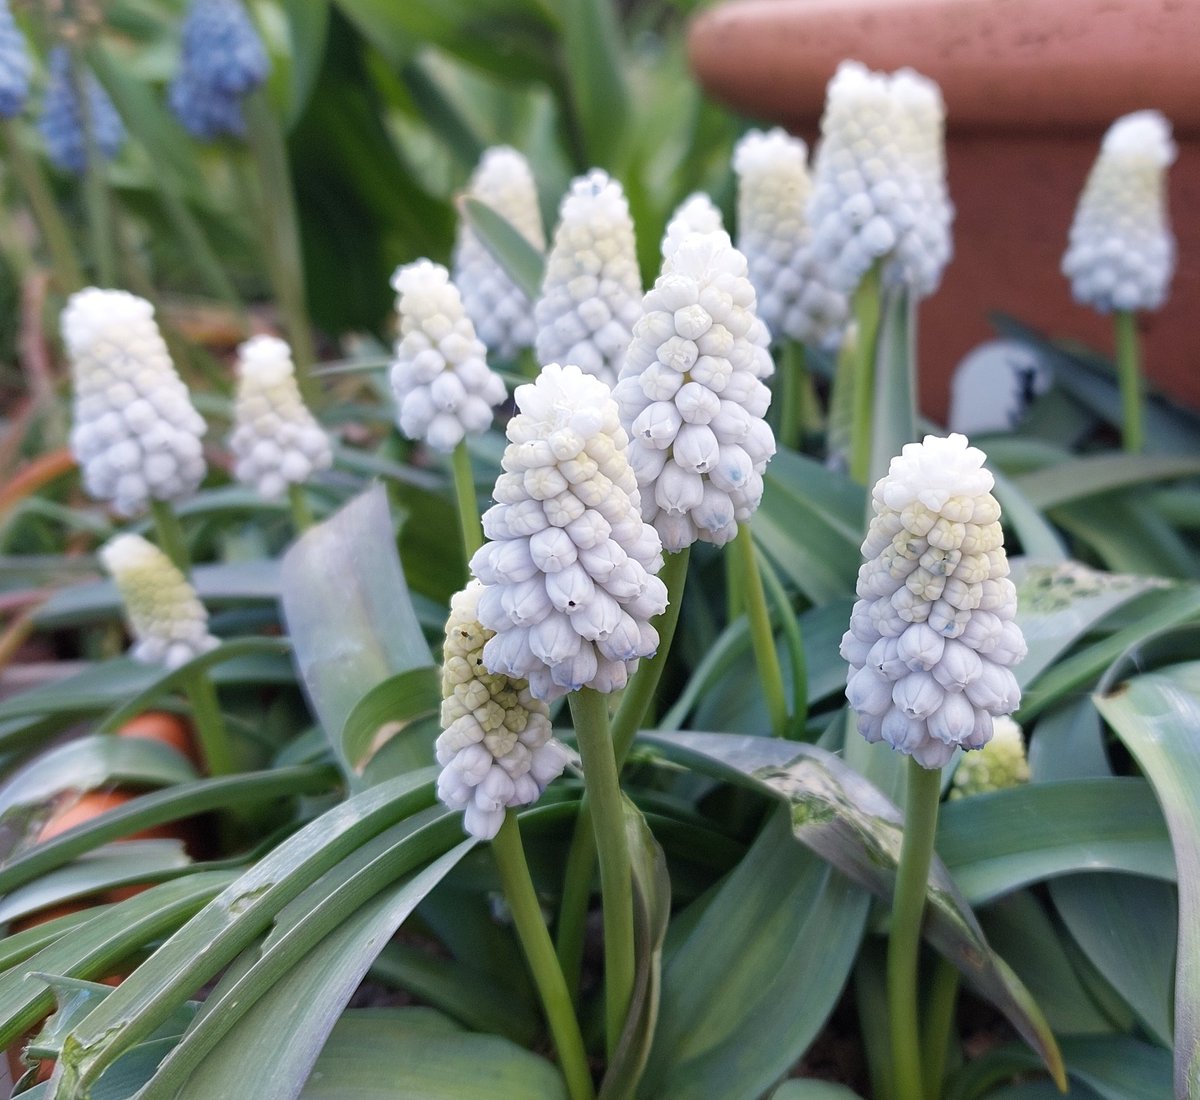 I think that this is the last of the Muscari here this year: 'Siberian Tiger'. Much cleaner white than I expected, and good leaves (except where the snails have eaten them!). #muscari #muscarisiberiantiger #containergardening #pots #peatfree